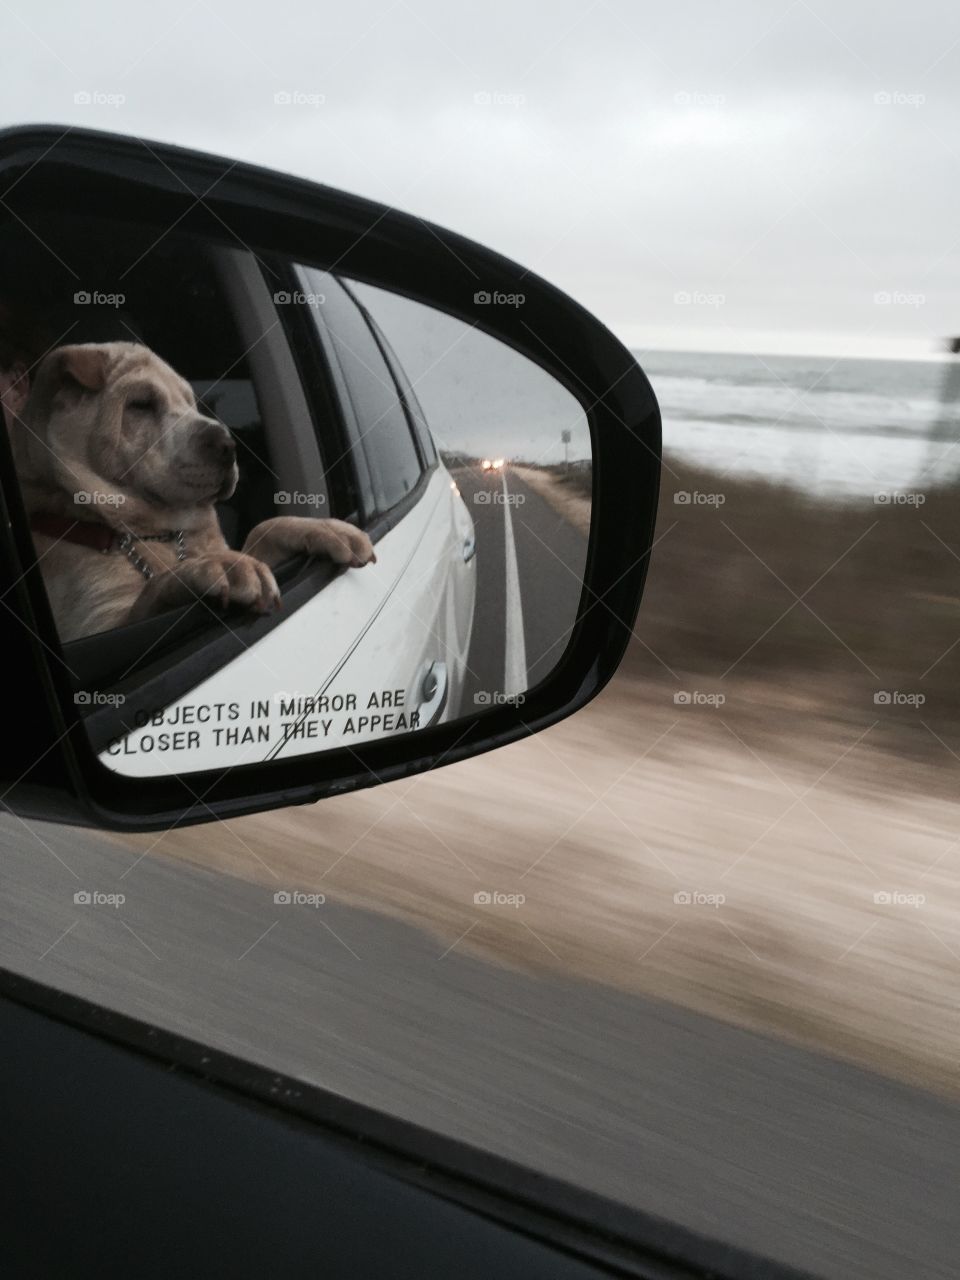 A Chinese Shar-Pei puppy riding in a car looks out the window of the vehicle on a oceanfront highway